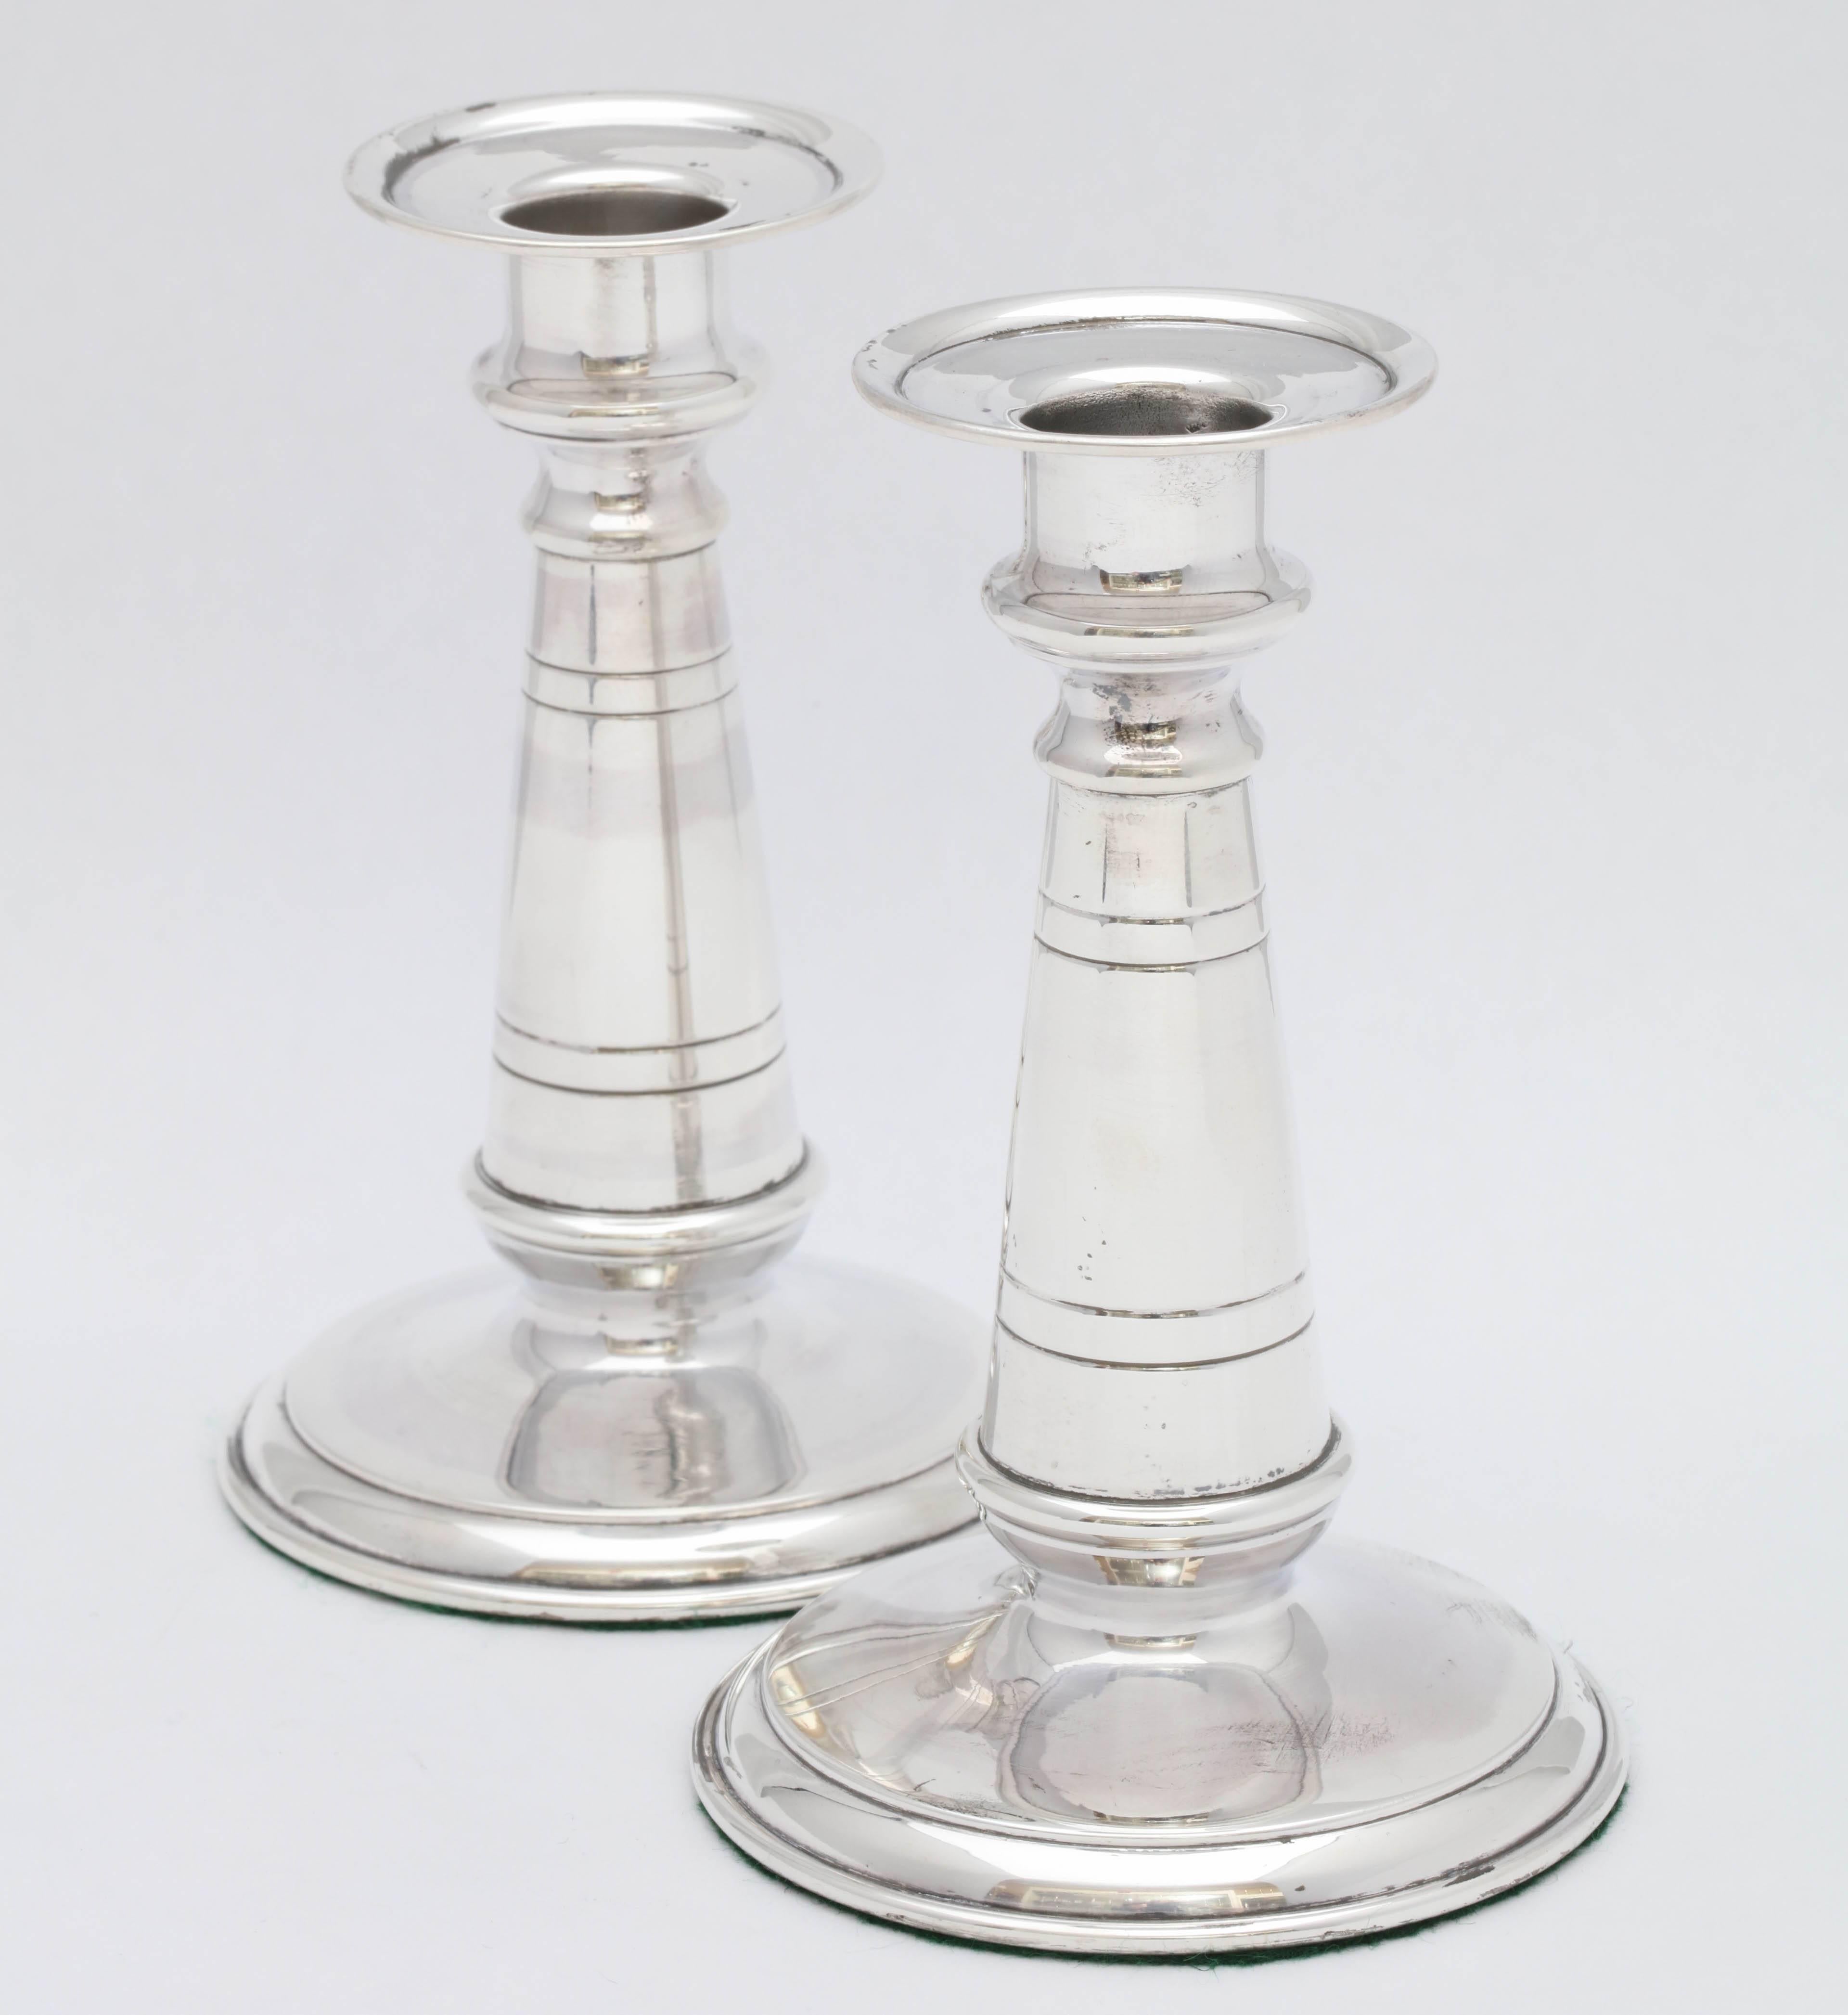 Pair of French, Empire, sterling silver candlesticks, Paris, circa 1850. Measures: 5 inches high x 3 1/8 inches diameter across base x 2 inches diameter across candle cups. Weighted. Dark spots in photos are reflections.